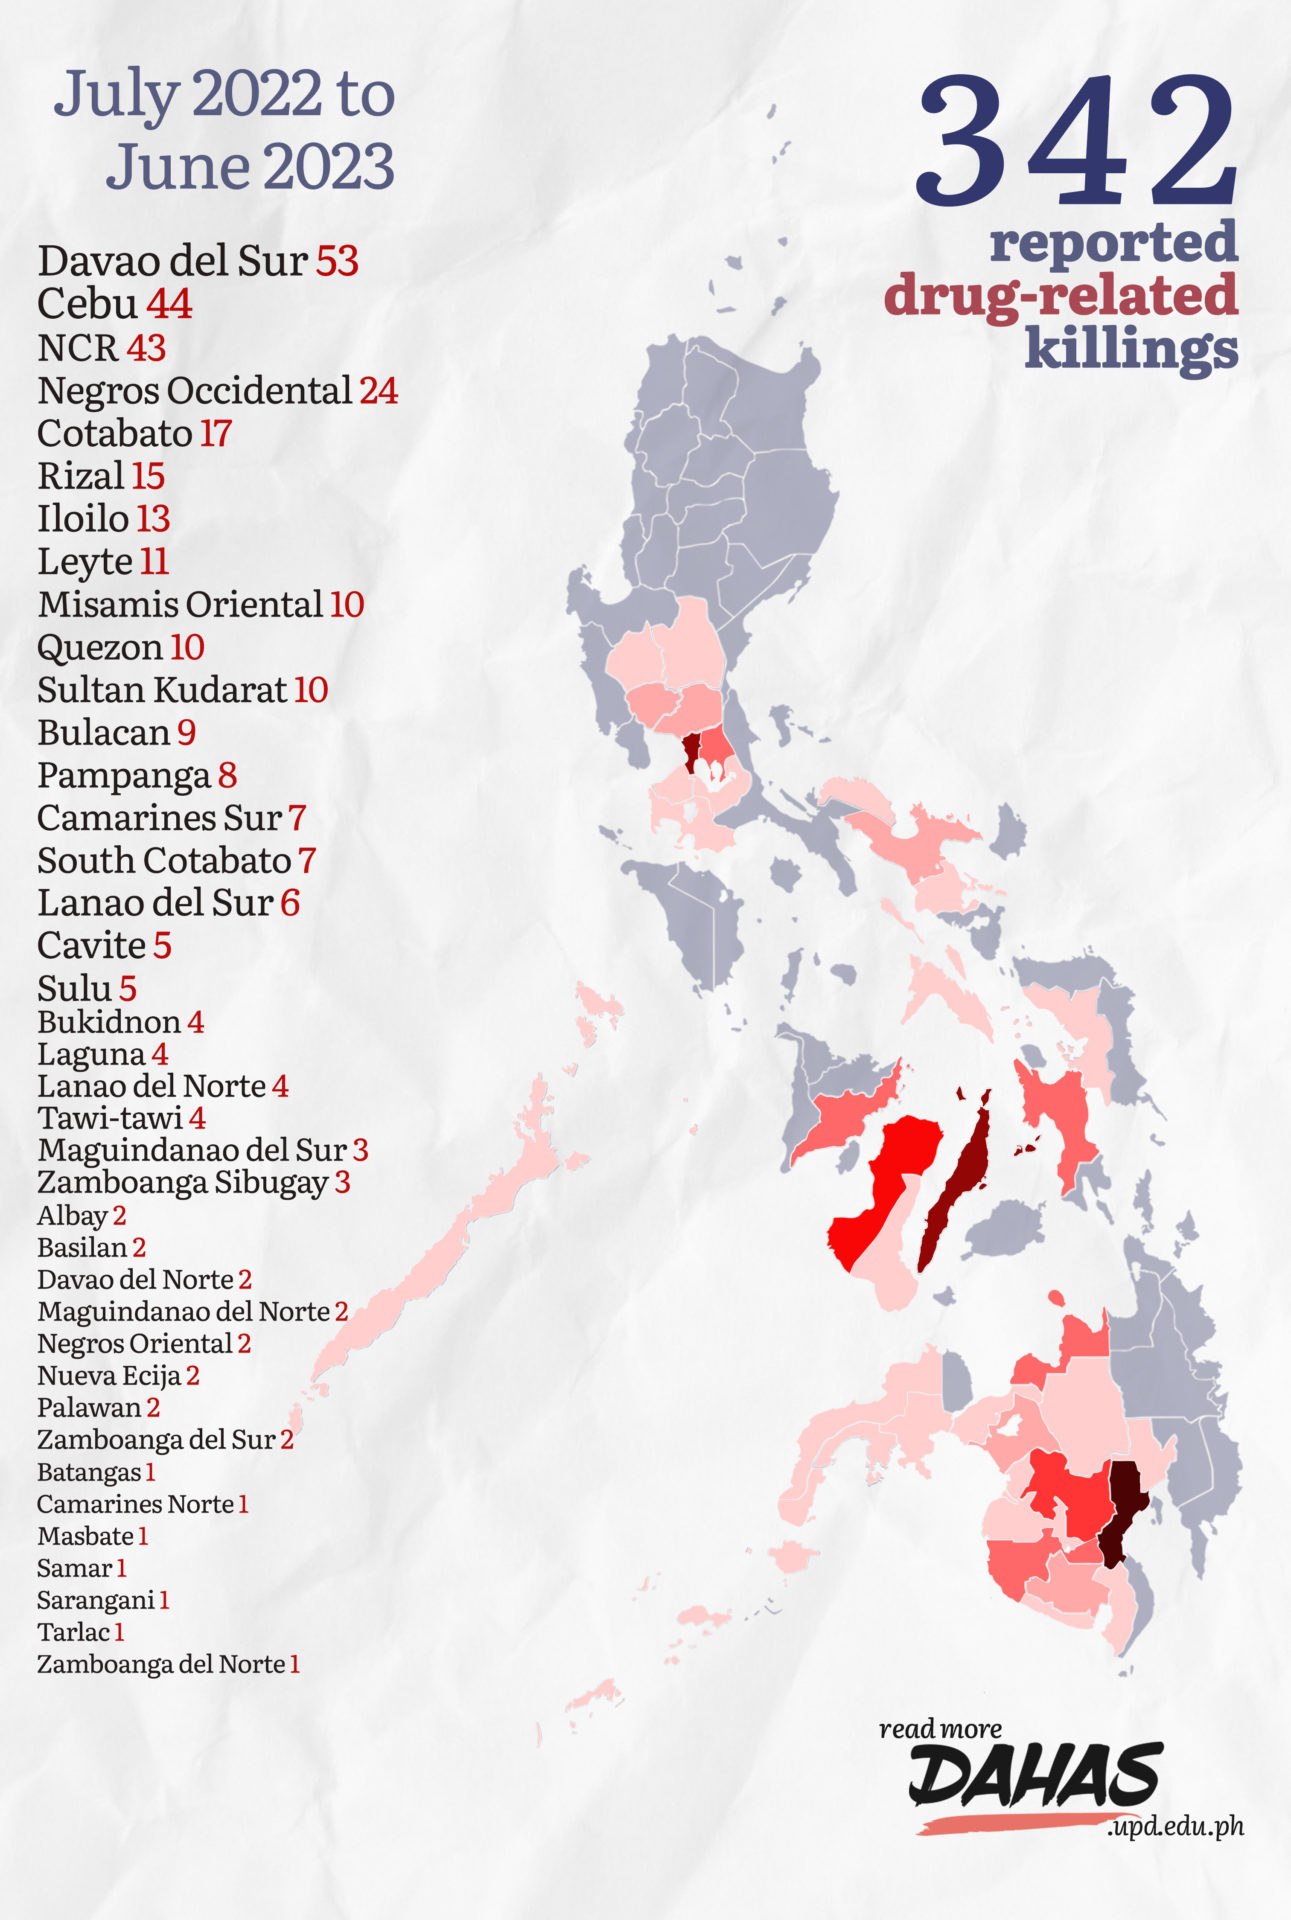 Figure 1. Reported Drug-Related Killings in the Philippines, July 2022-June 2023.